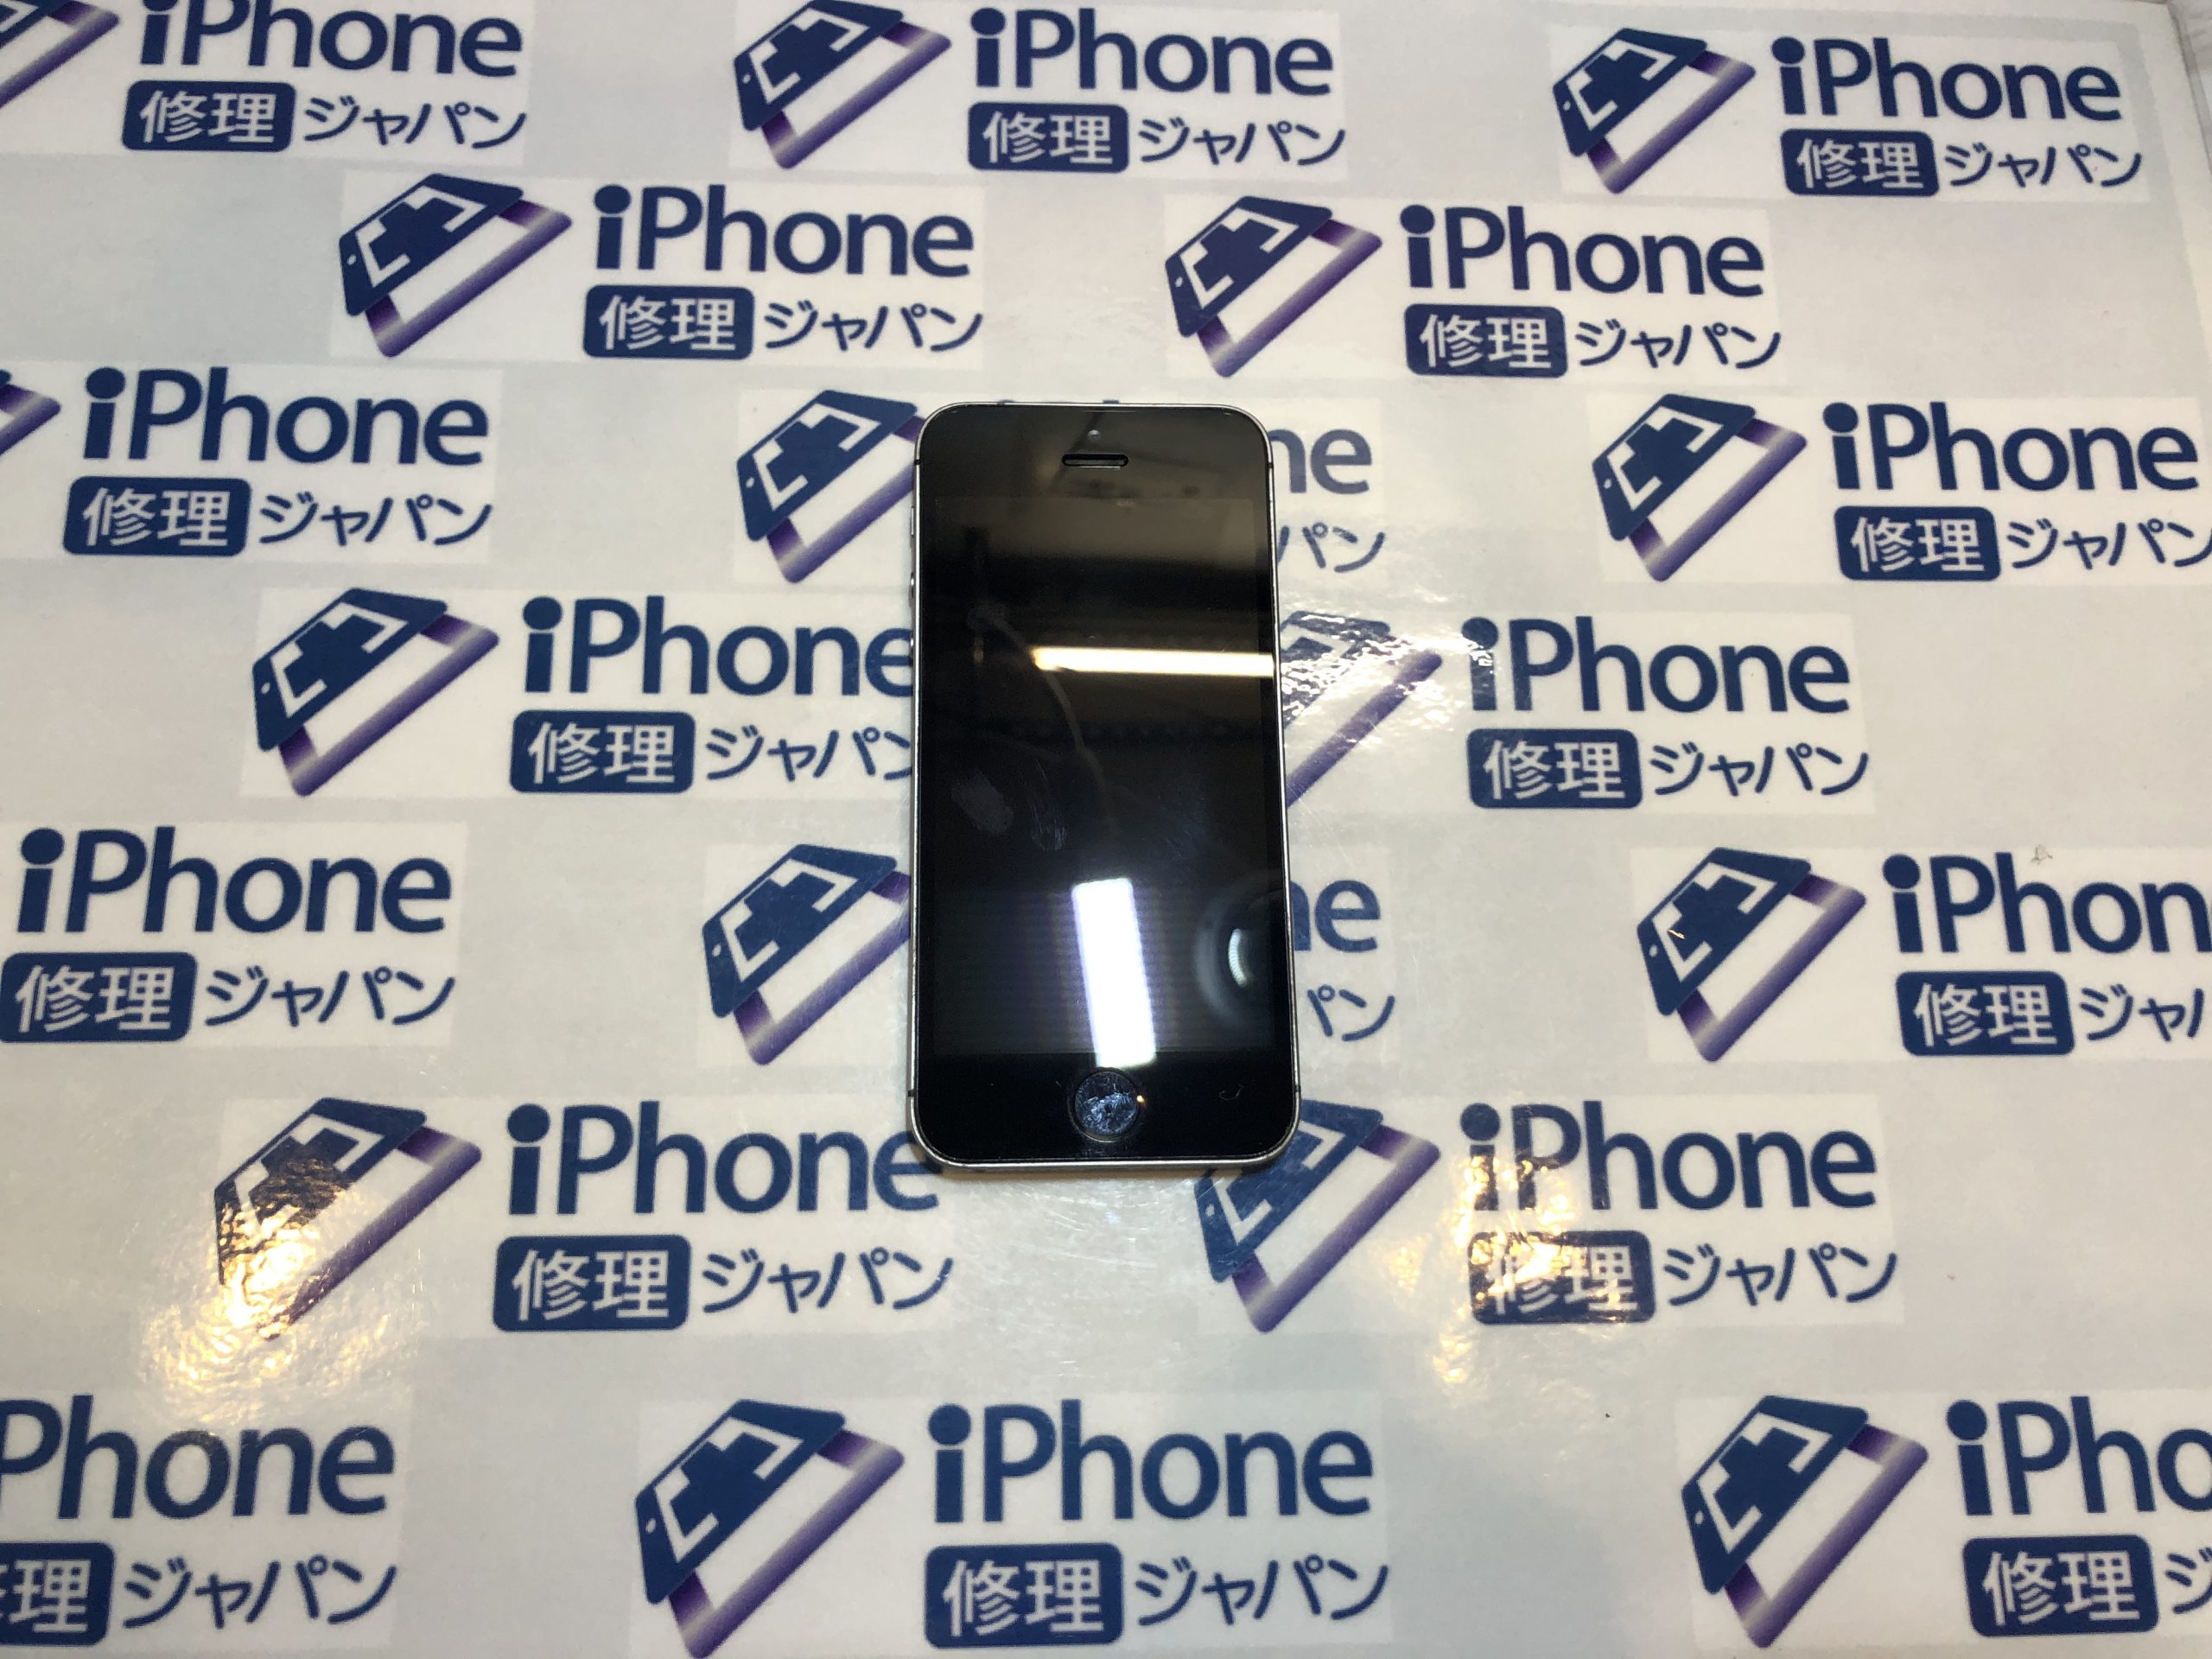 iPhoneSEバッテリー交換（アイフォンバッテリー交換。）